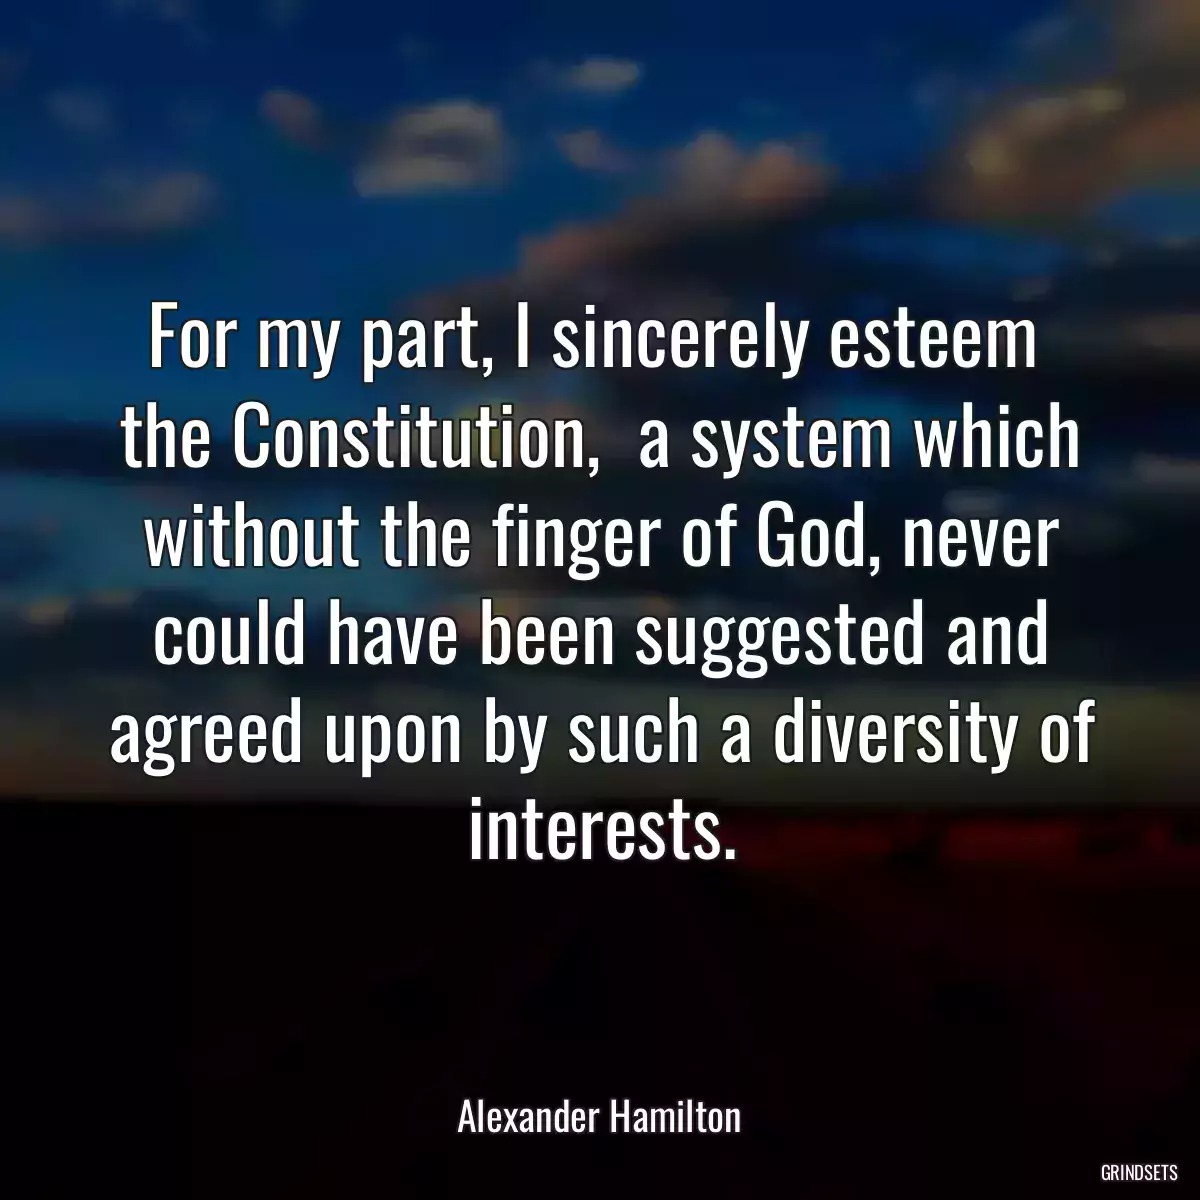 For my part, I sincerely esteem  the Constitution,  a system which without the finger of God, never could have been suggested and agreed upon by such a diversity of interests.